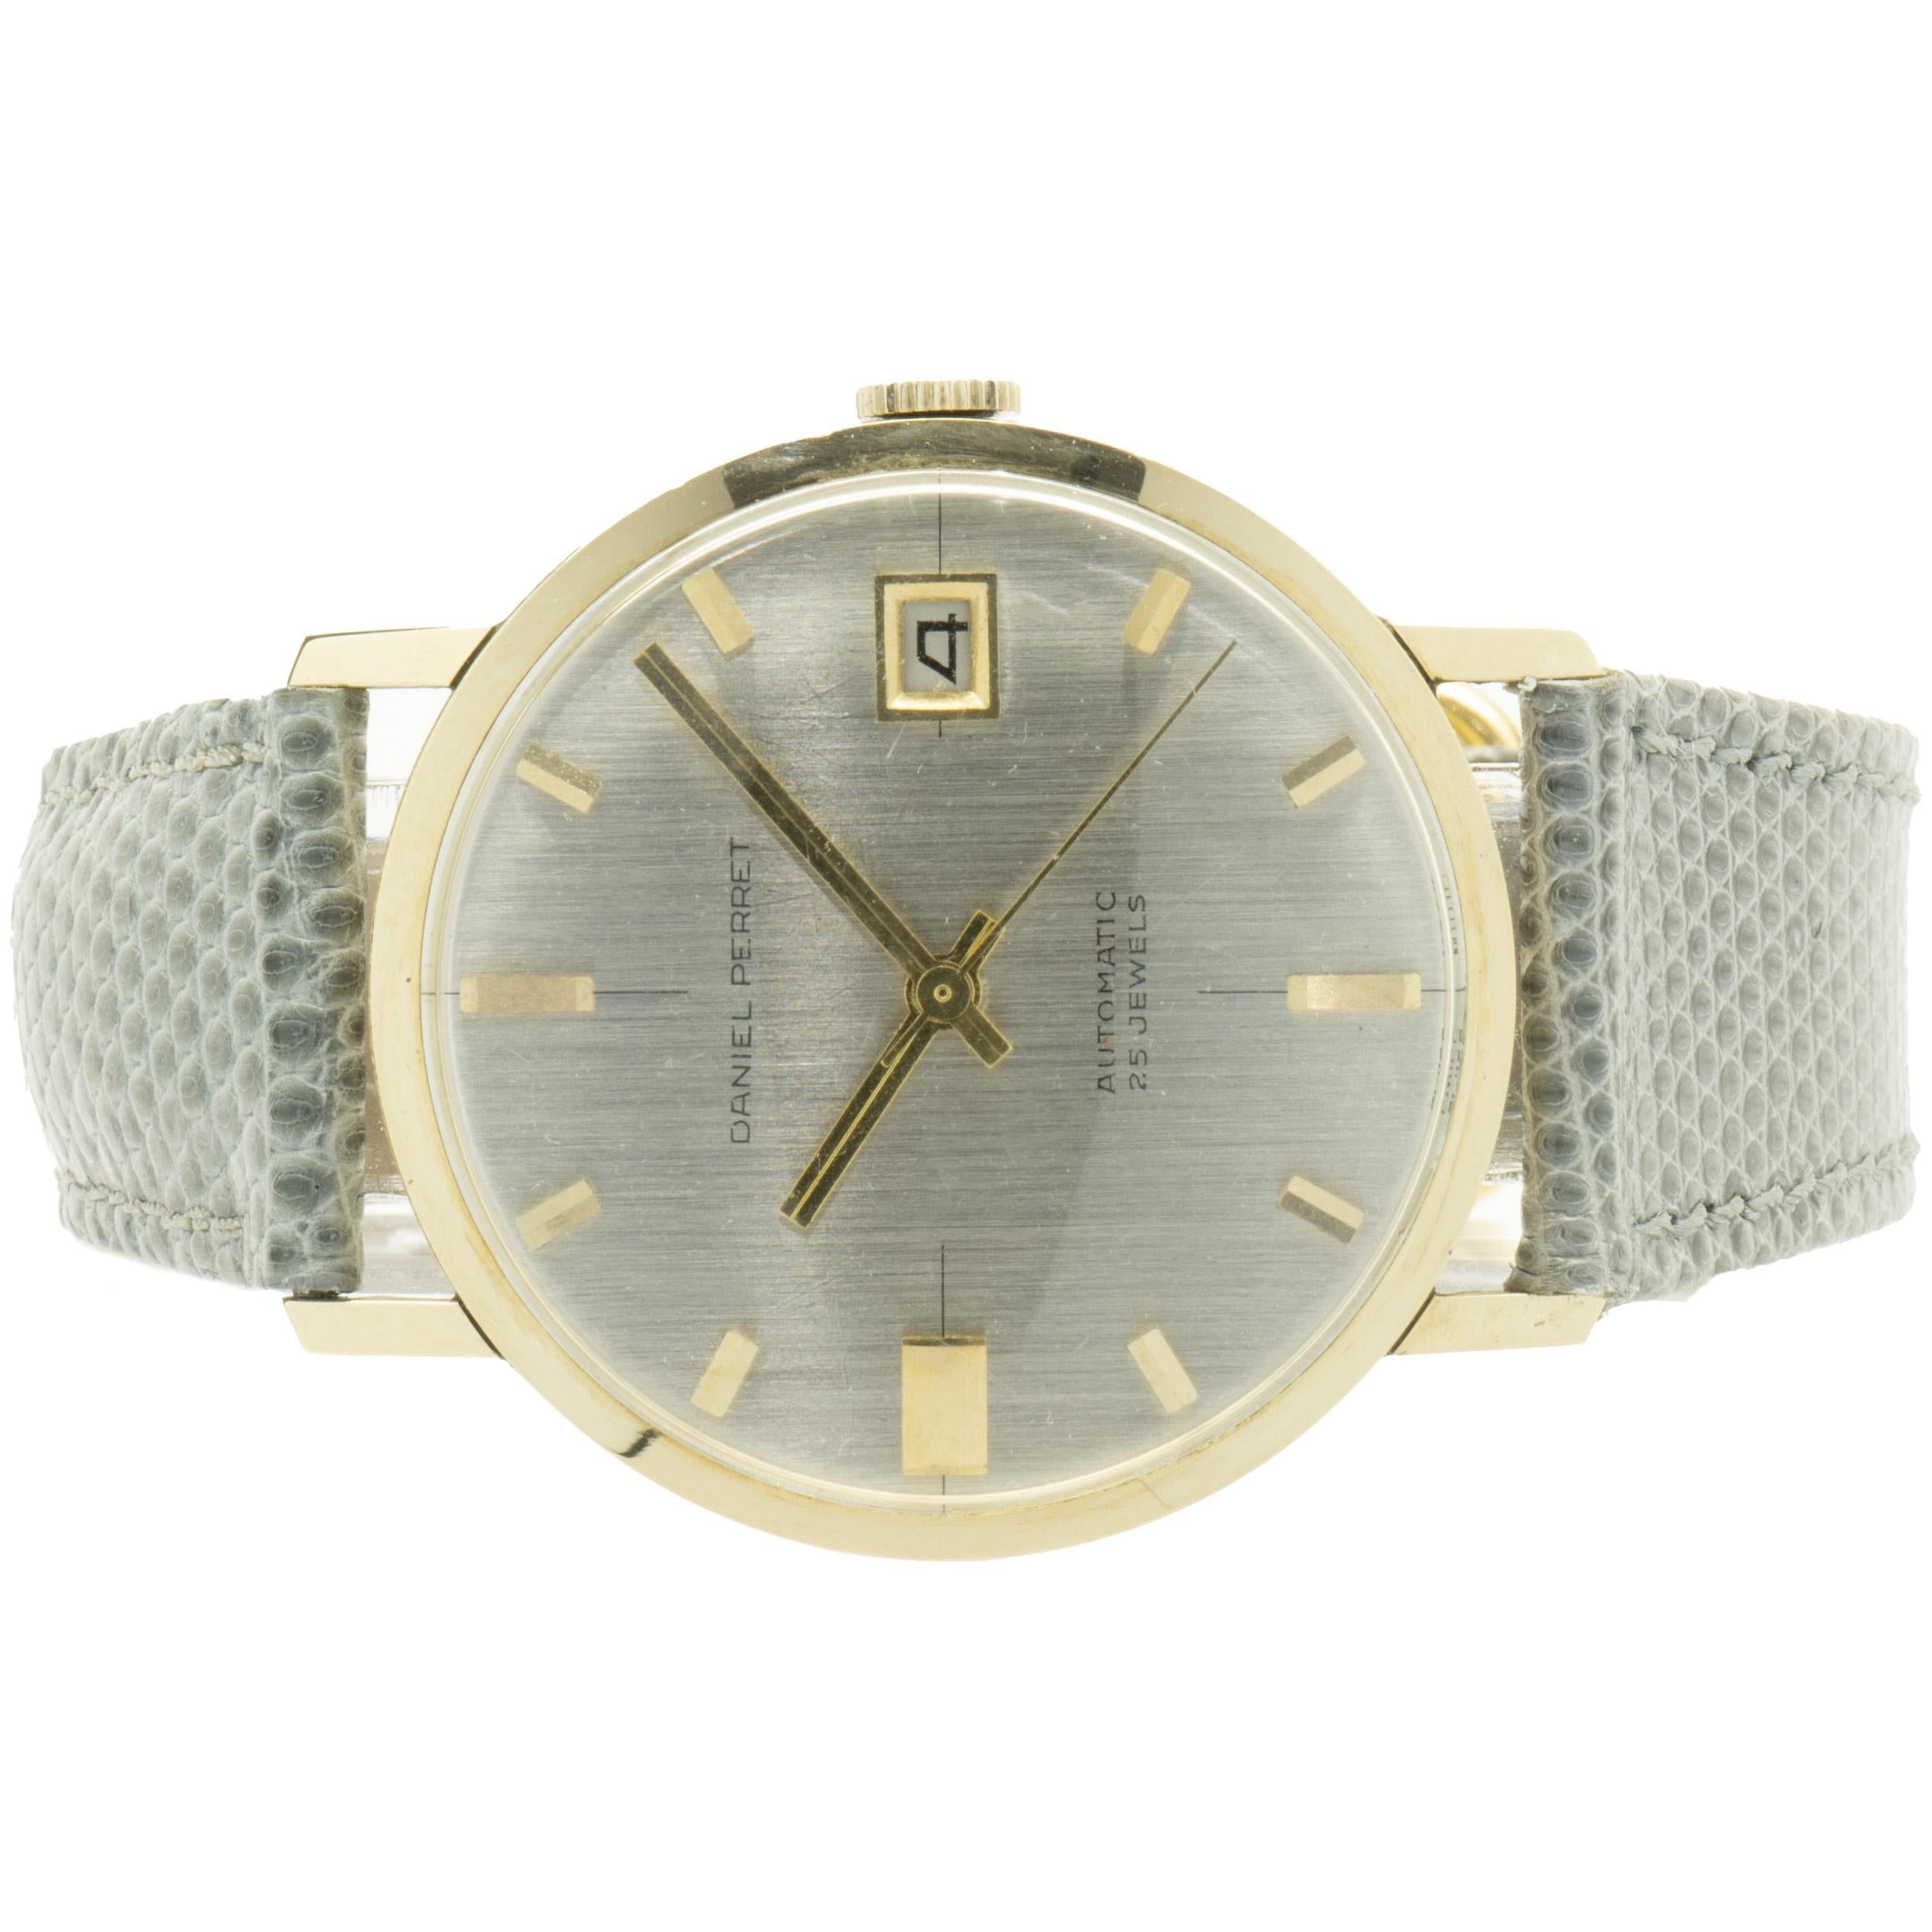 Movement: automatic
Function: hours, minutes, seconds, date
Case: 33.9mm round 18K yellow gold case, acrylic crystal, push/pull crown, smooth bezel
Dial: silver stick
Bracelet: grey lizard, buckle
Serial # 25XXX

No box or papers included
Guaranteed